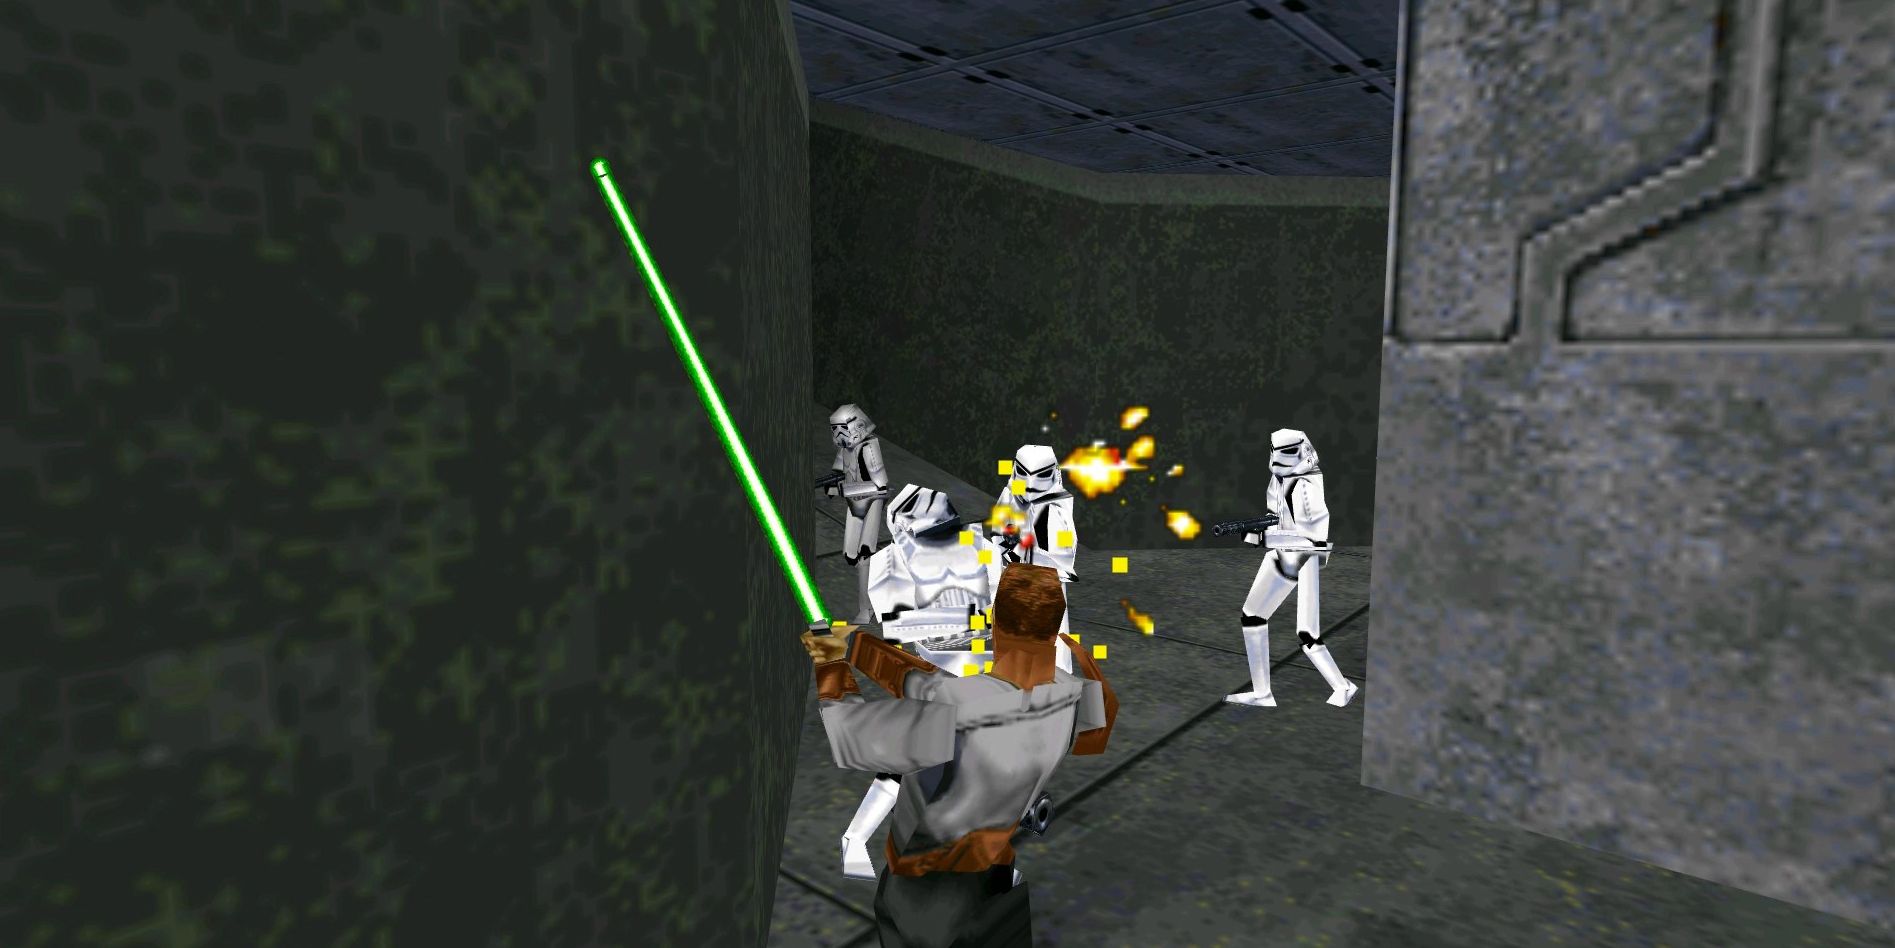 Kyle Katarn fighting stormtrooopers with a green lightsaber in Star Wars Jedi Knight Dark Forces 2.